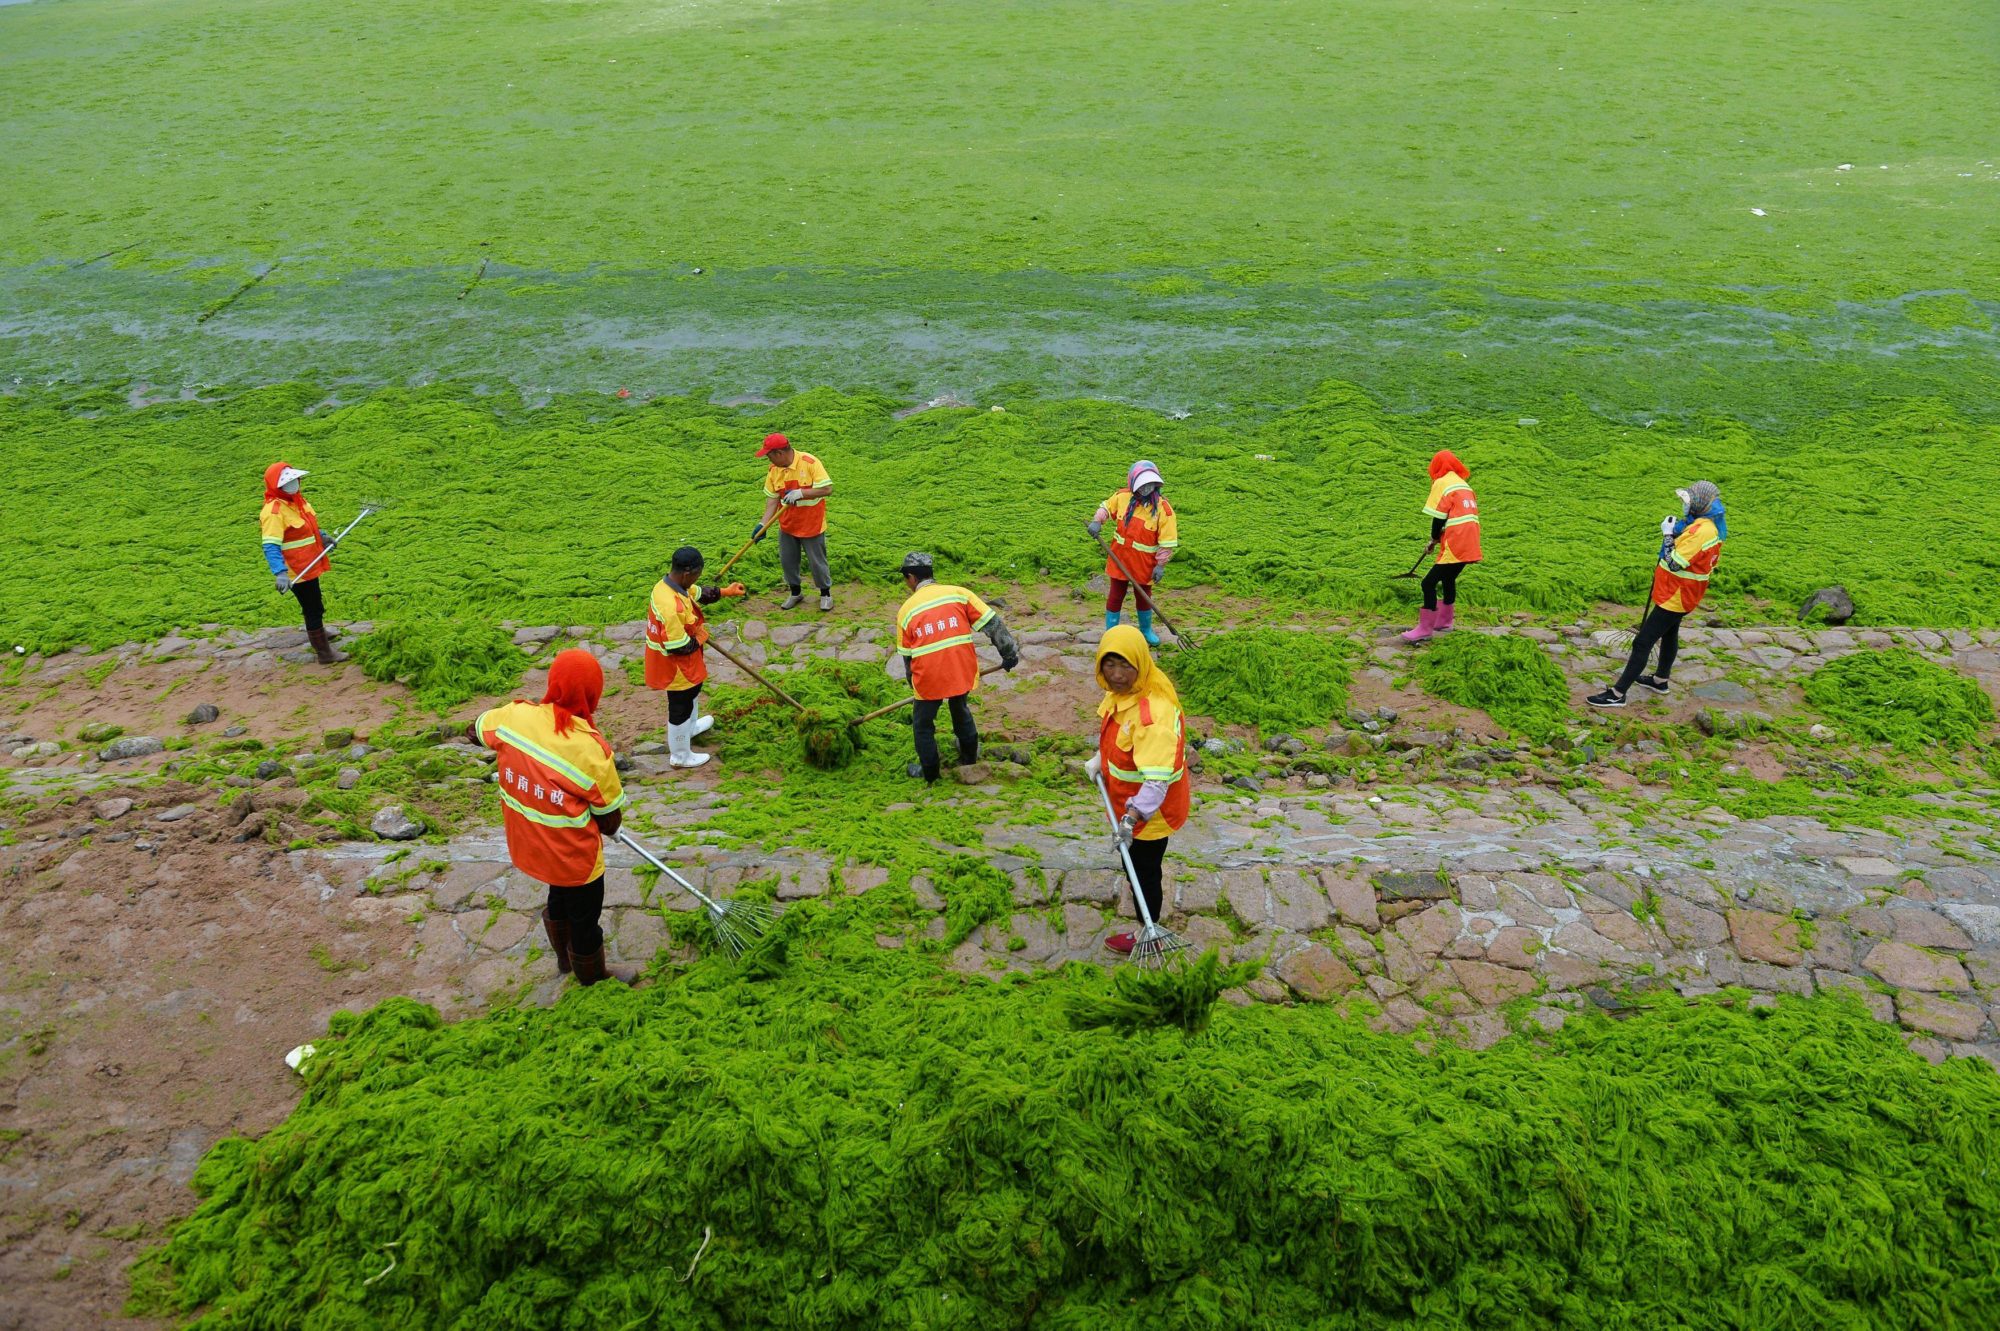 The green algae covers beach in Qingdao, east China's Shandong Province.